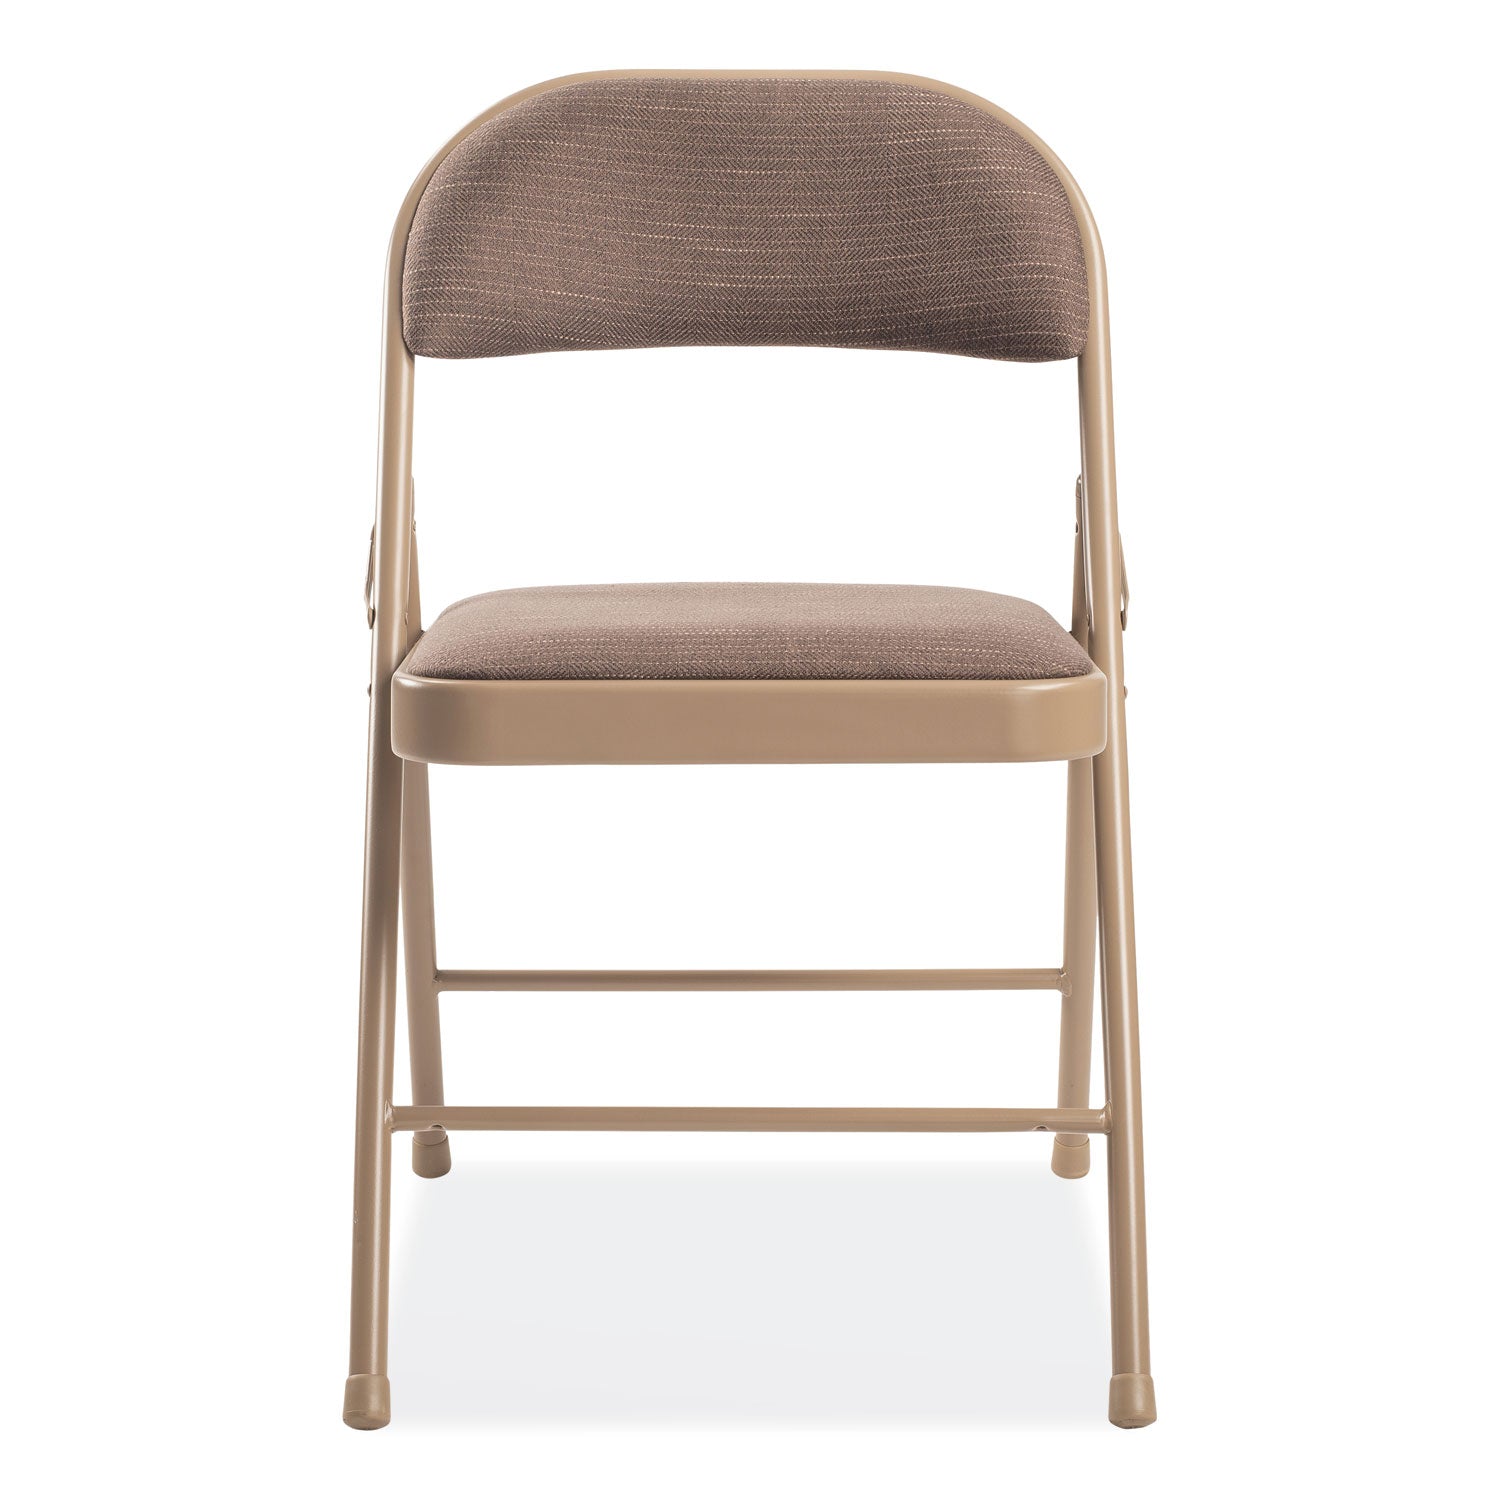 970-series-fabric-padded-steel-folding-chair-supports-250-lb-1775-seat-ht-star-trail-brown-4-ct-ships-in-1-3-bus-days_nps973 - 4